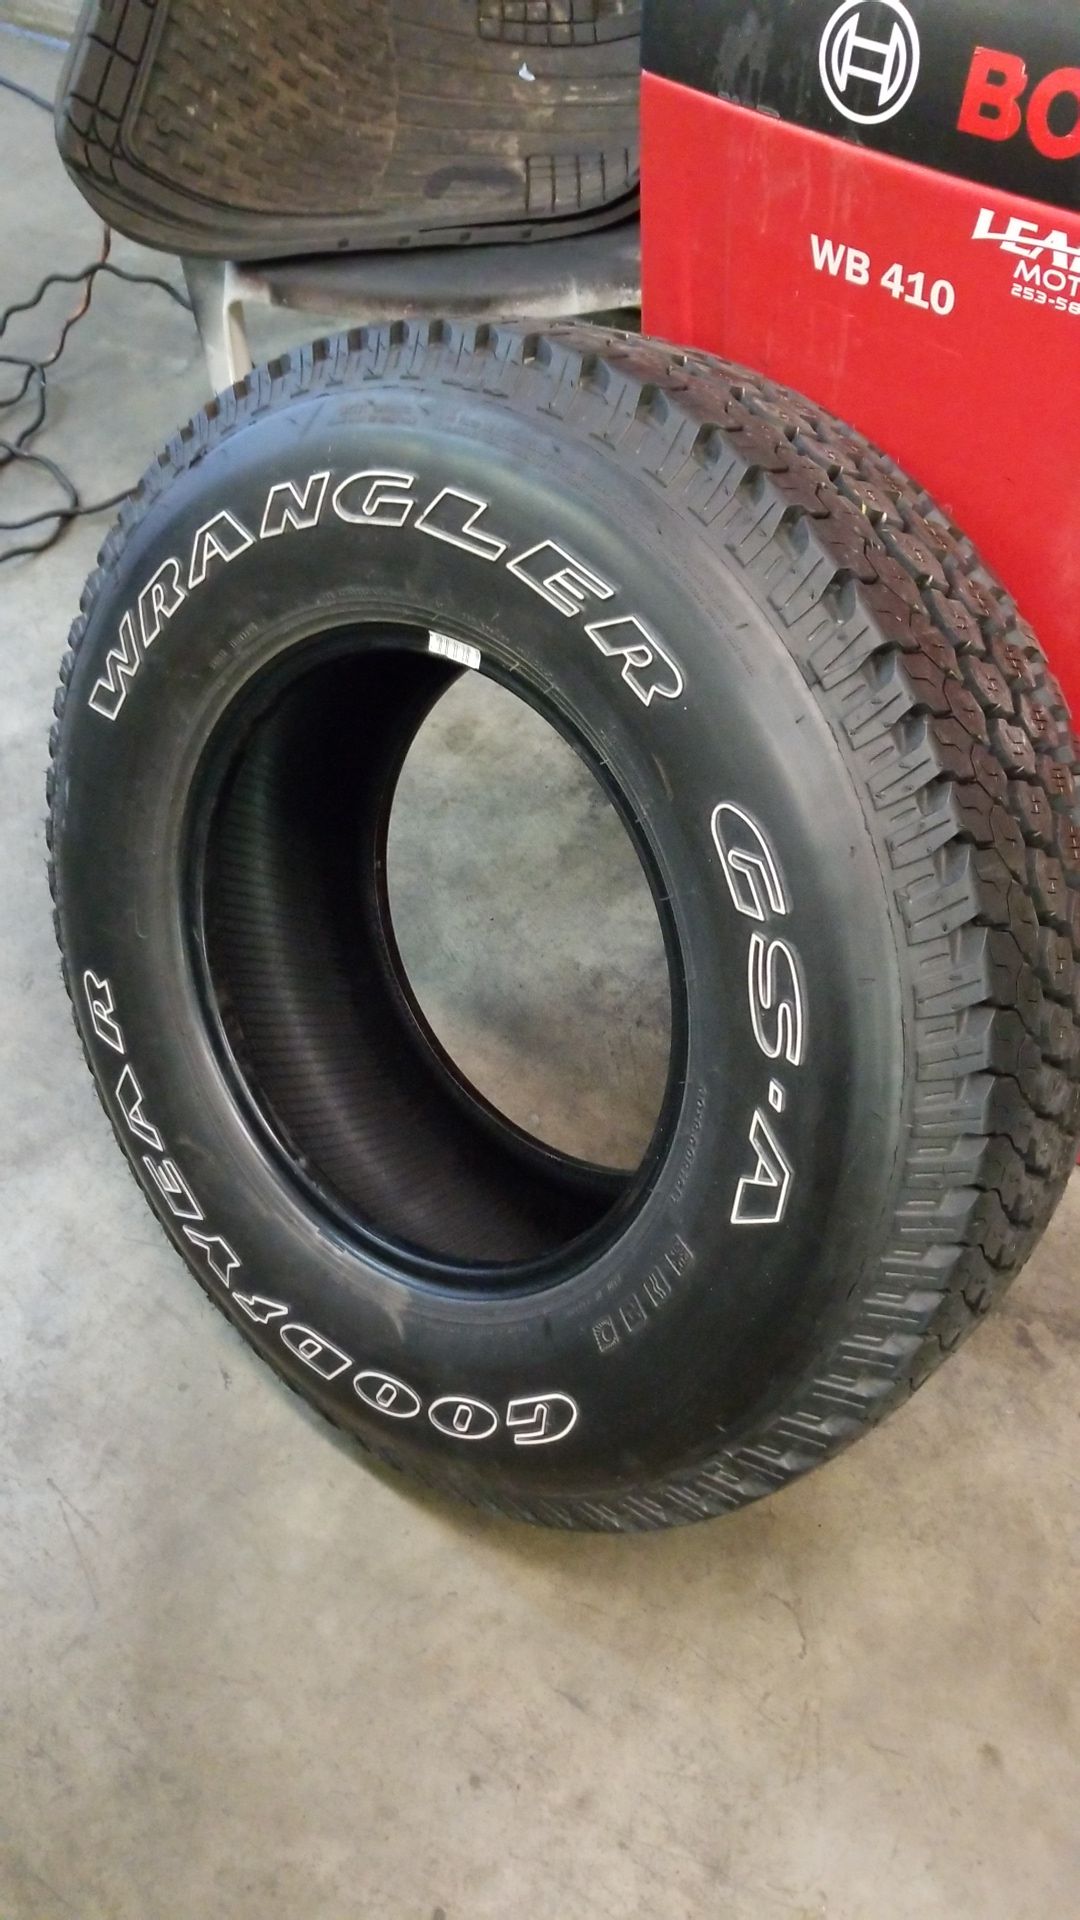 Brand new Goodyear Wrangler gs-a  for Sale in Lakewood, WA -  OfferUp